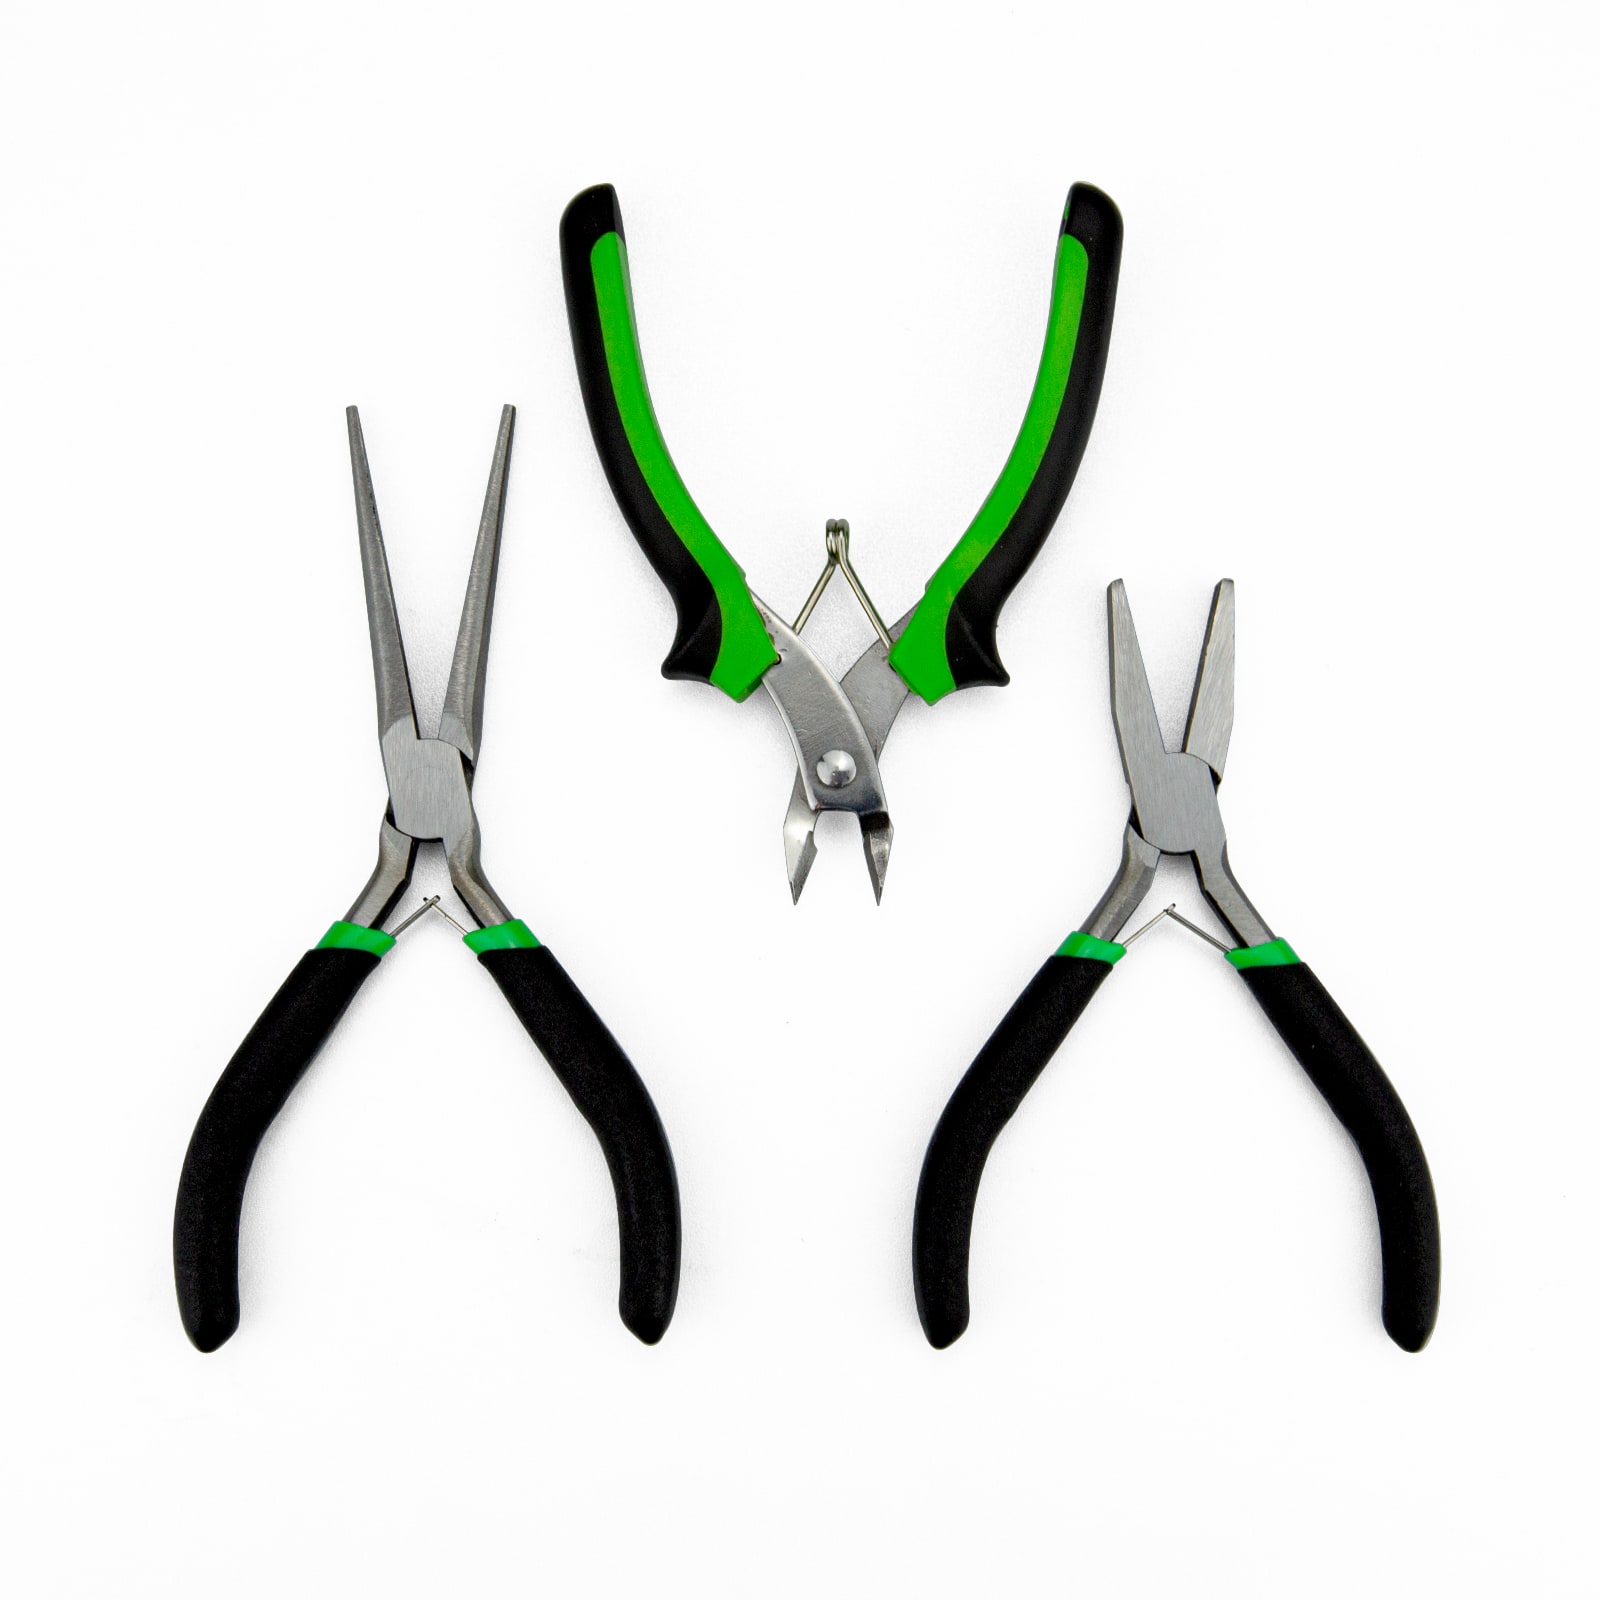 TOOL KIT CLIPPER & NEEDLE NOSE PLIERS METAL EARTH 2PC/SET - SAYAL  Electronics and Hobbies